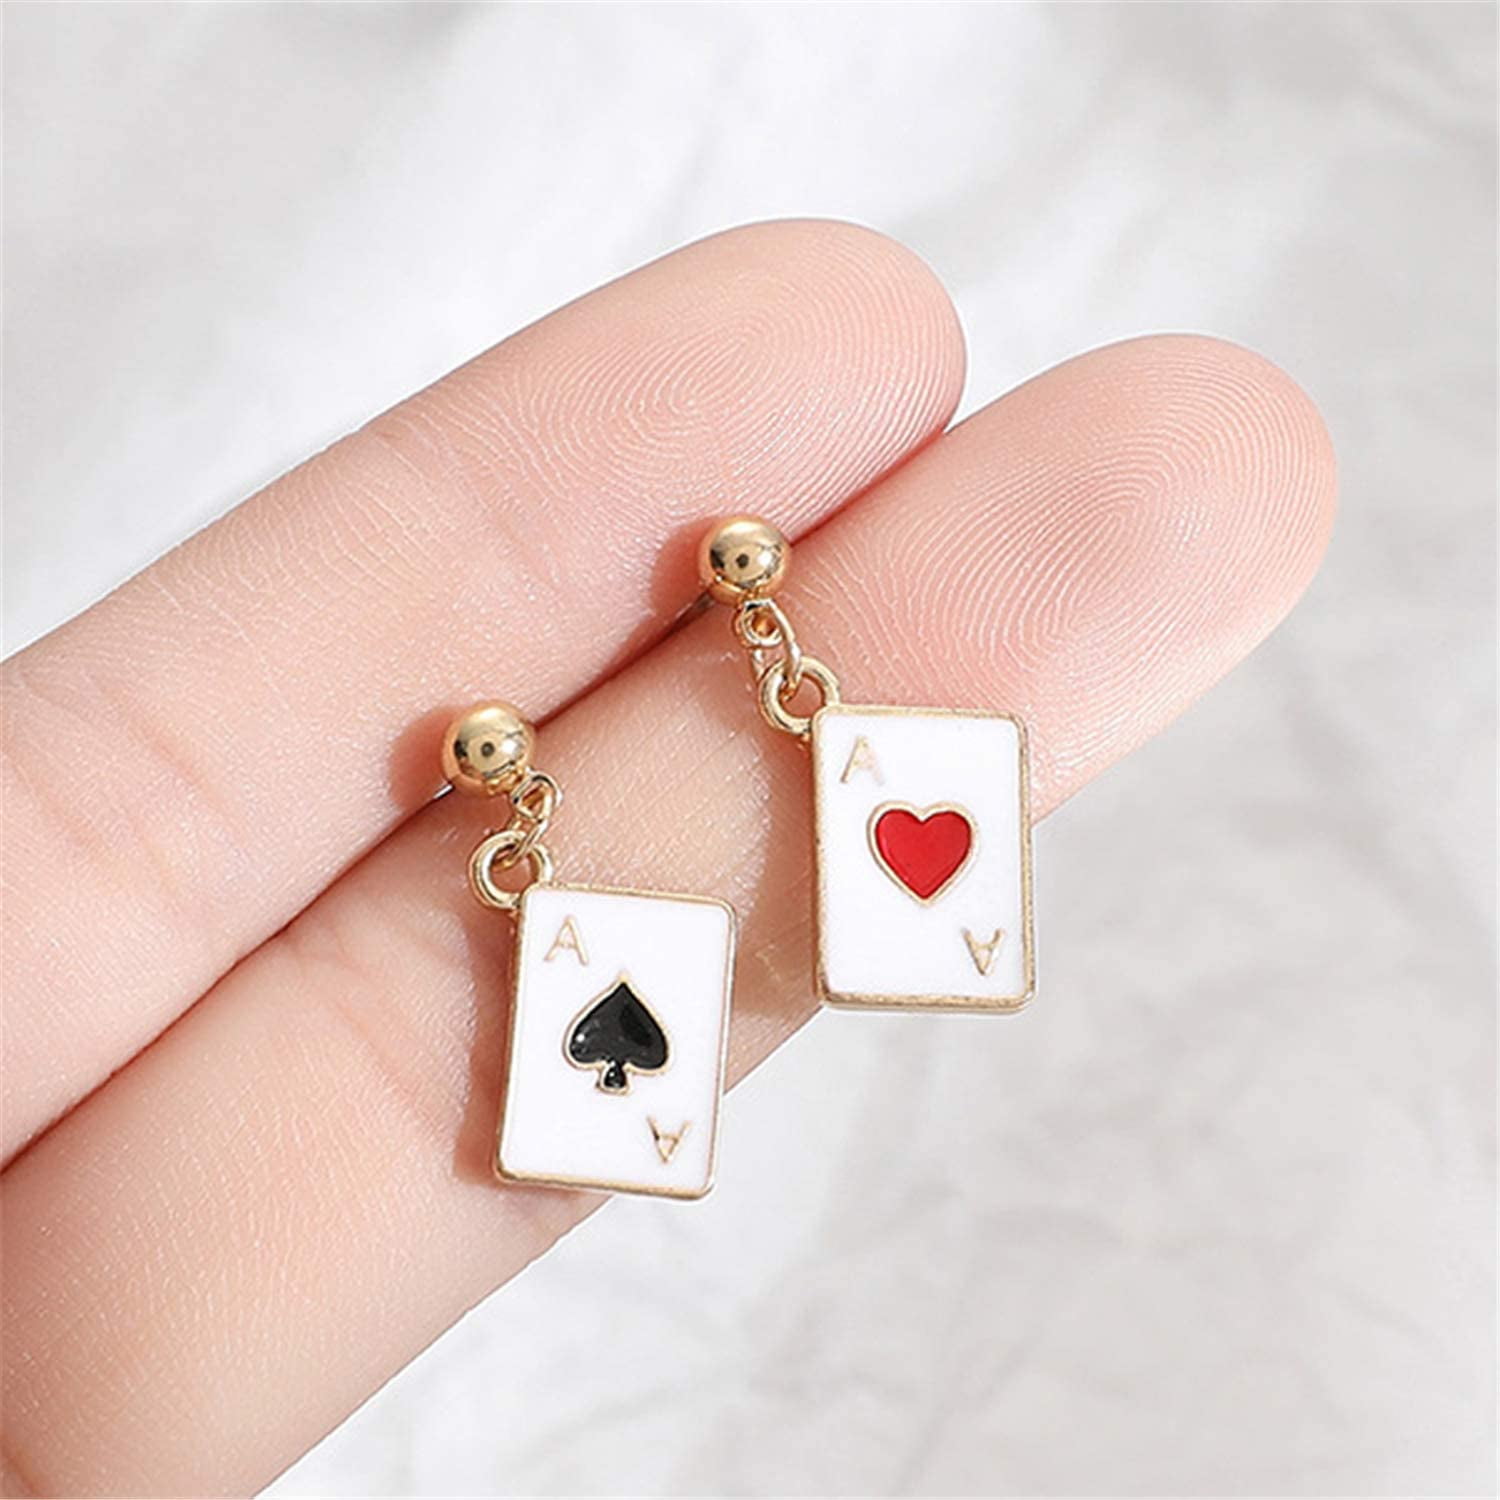 Poker Earrings Necklace Set Trendy Gold Plated A Earring Playing Cards Pattern Drop Earrings Necklace Charms Hearts Spades Aces Dangle Earrings for Women Girls Jewelry